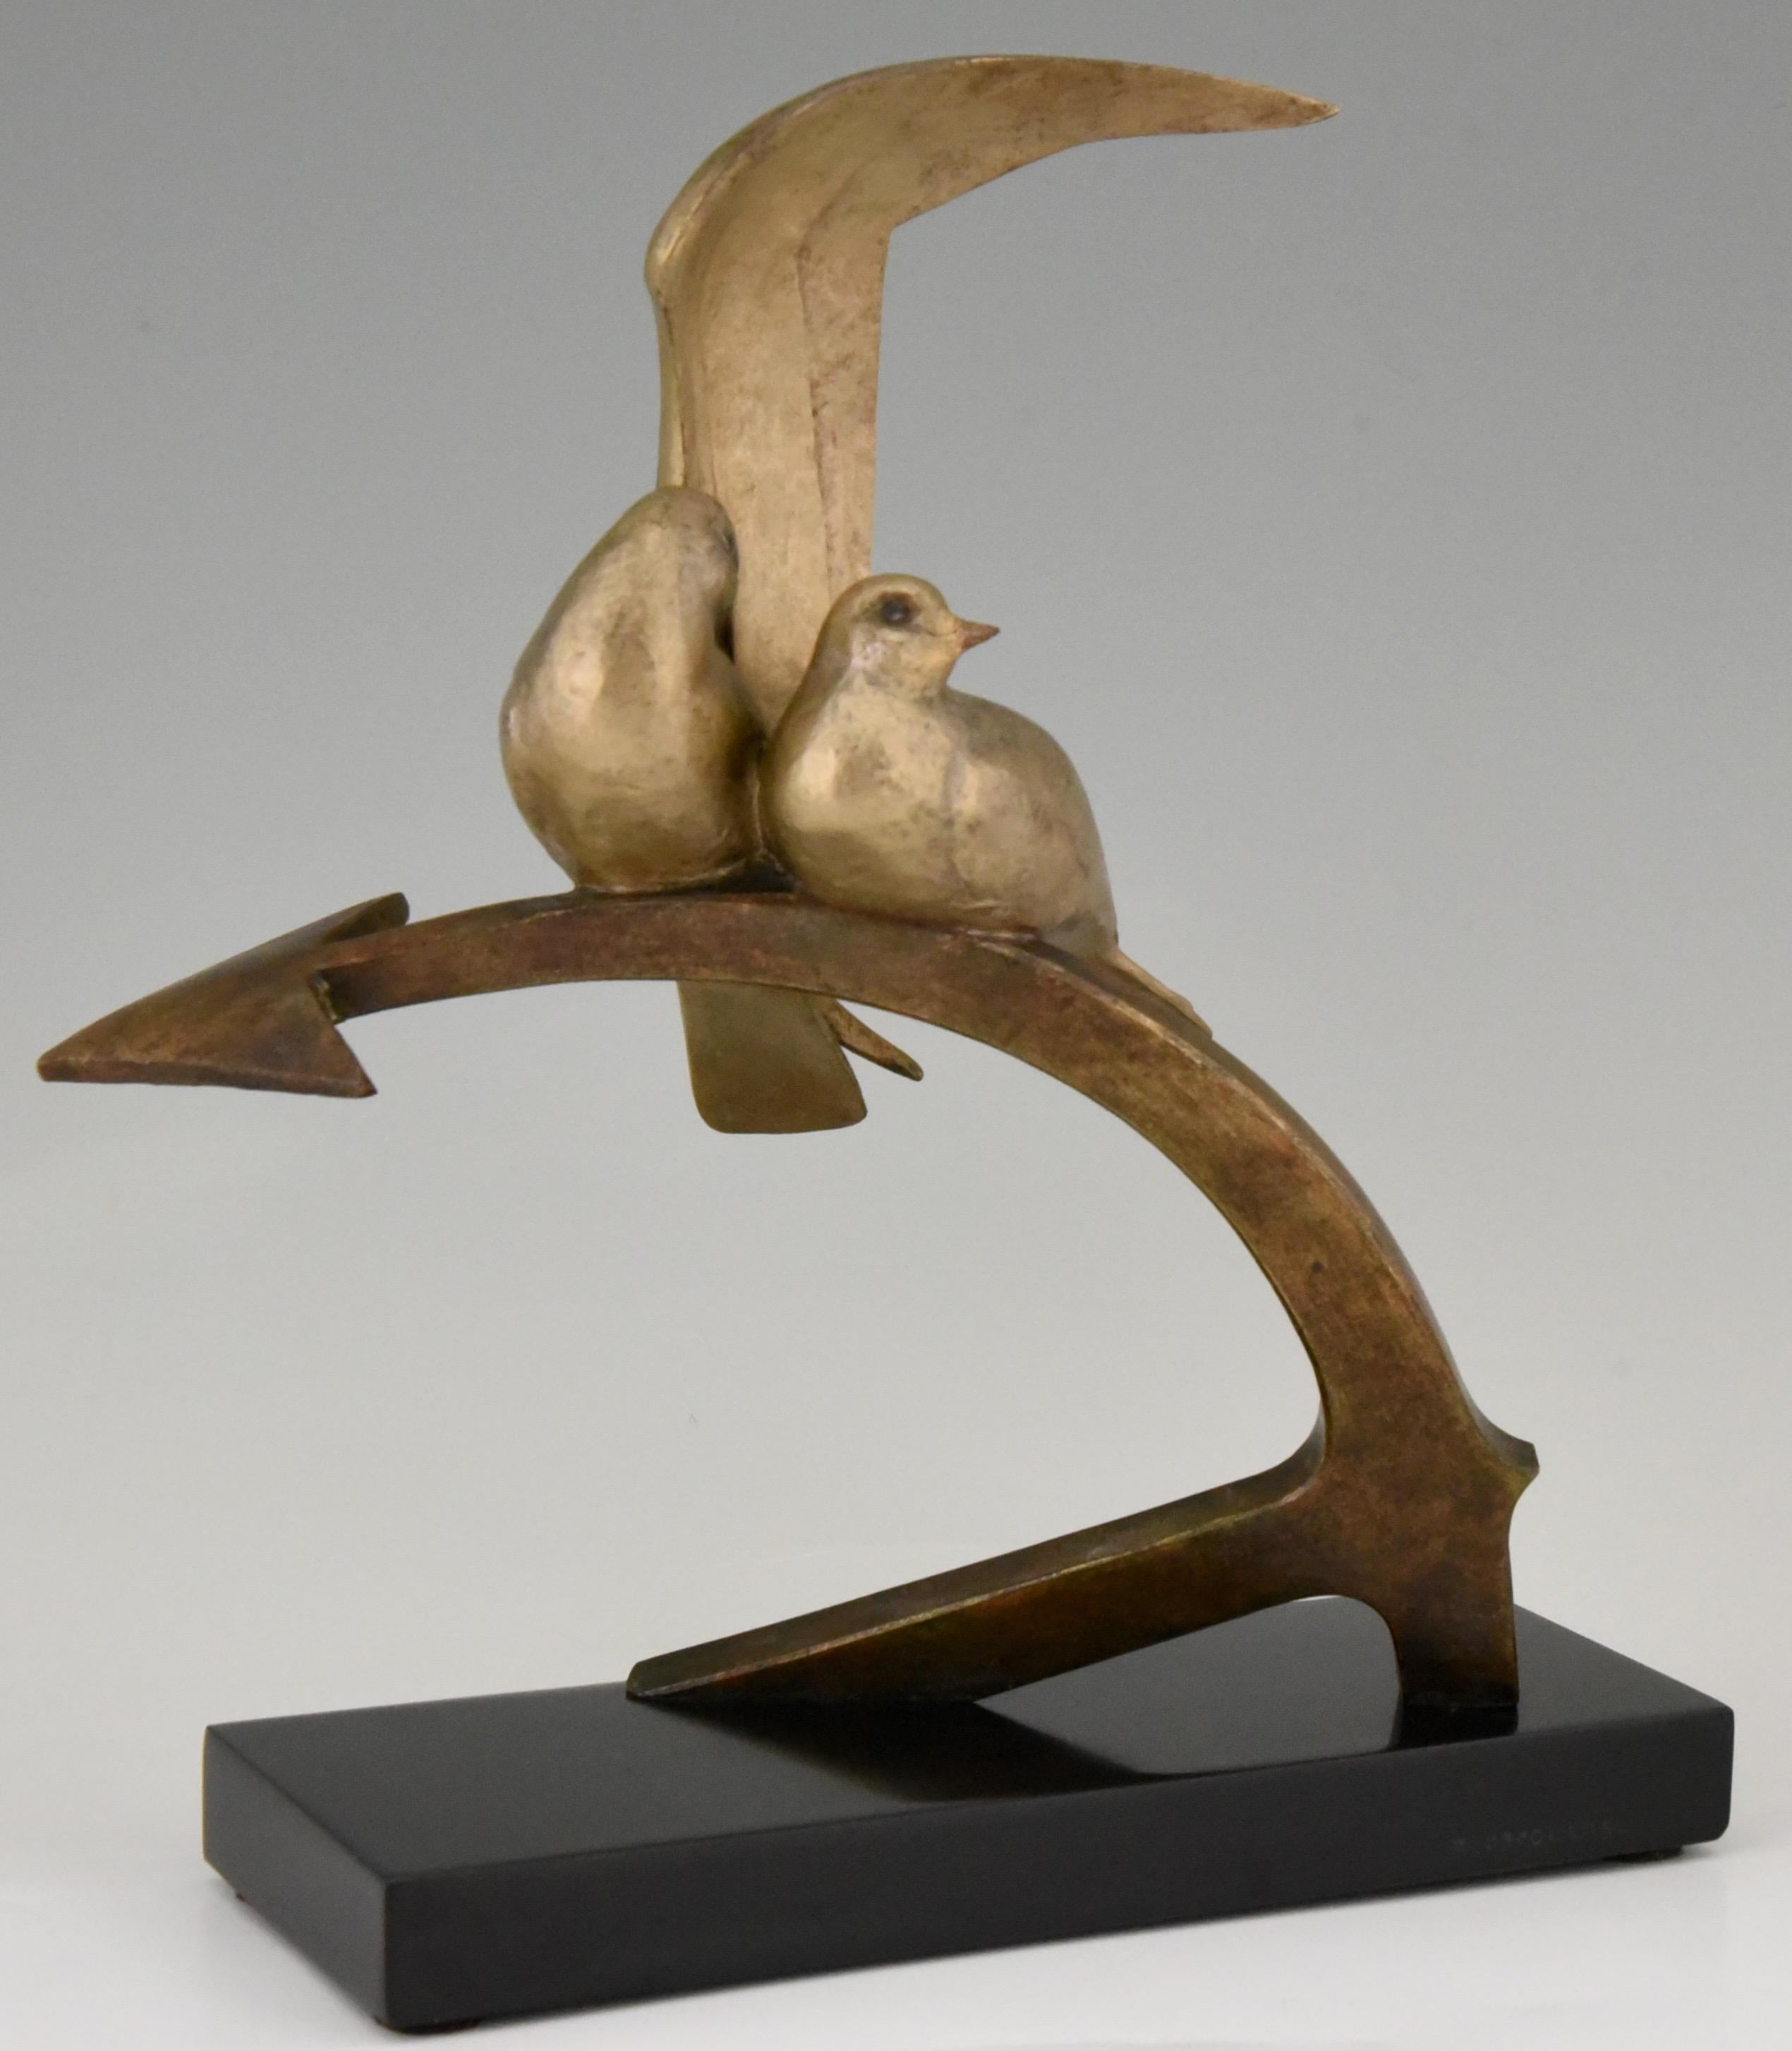 Art Deco sculpture picturing a couple of birds sitting on an ancre by the well known French sculptor Andre Vincent Becquerel. The sculpture is signed and has the foundry mark L.N. Paris for Les Neveux de Lehmann. The bronze has a lovely patina and